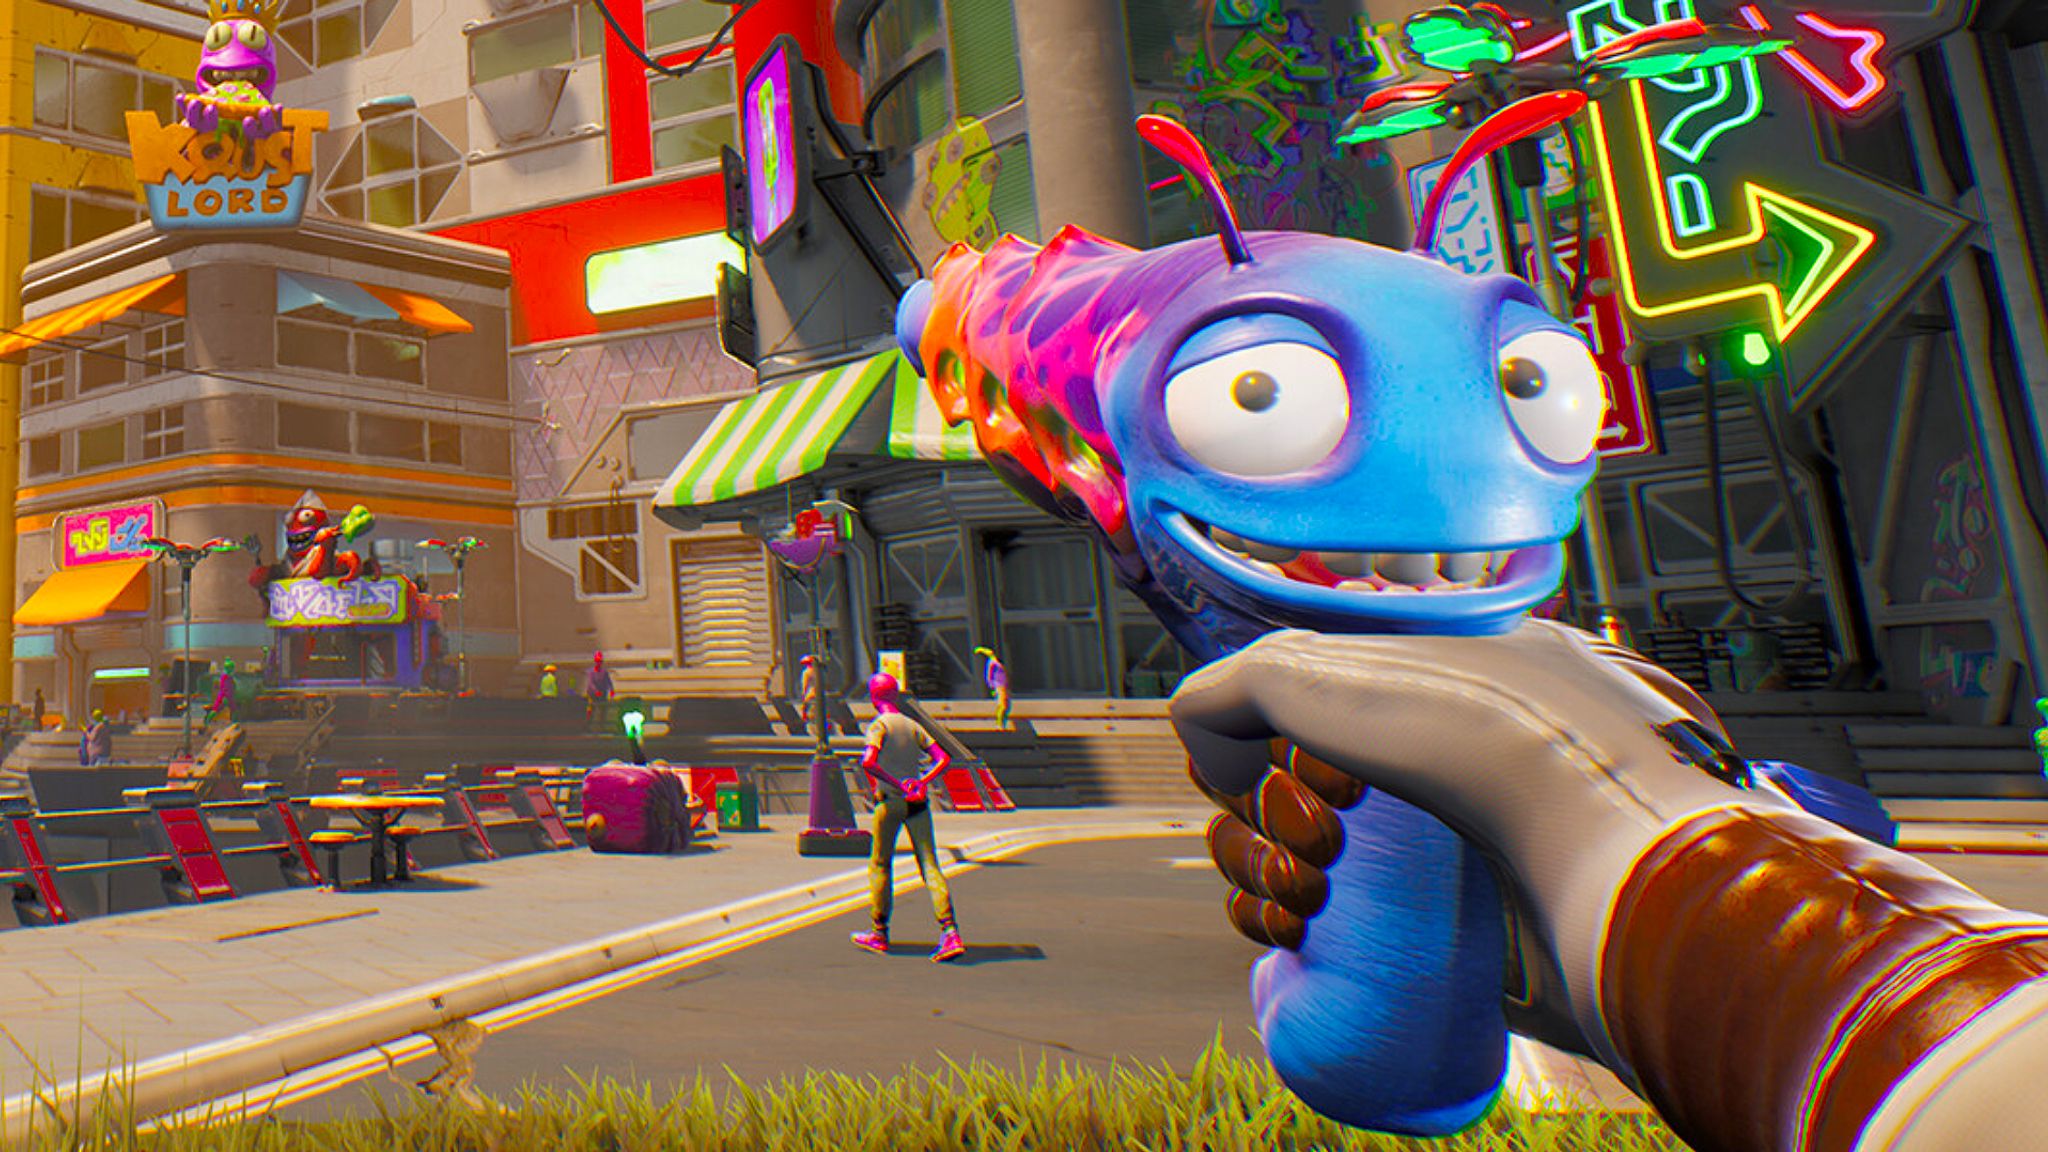 High On Life: Rick And Morty co-creator on his new shooter game where the  guns talk back, Science & Tech News